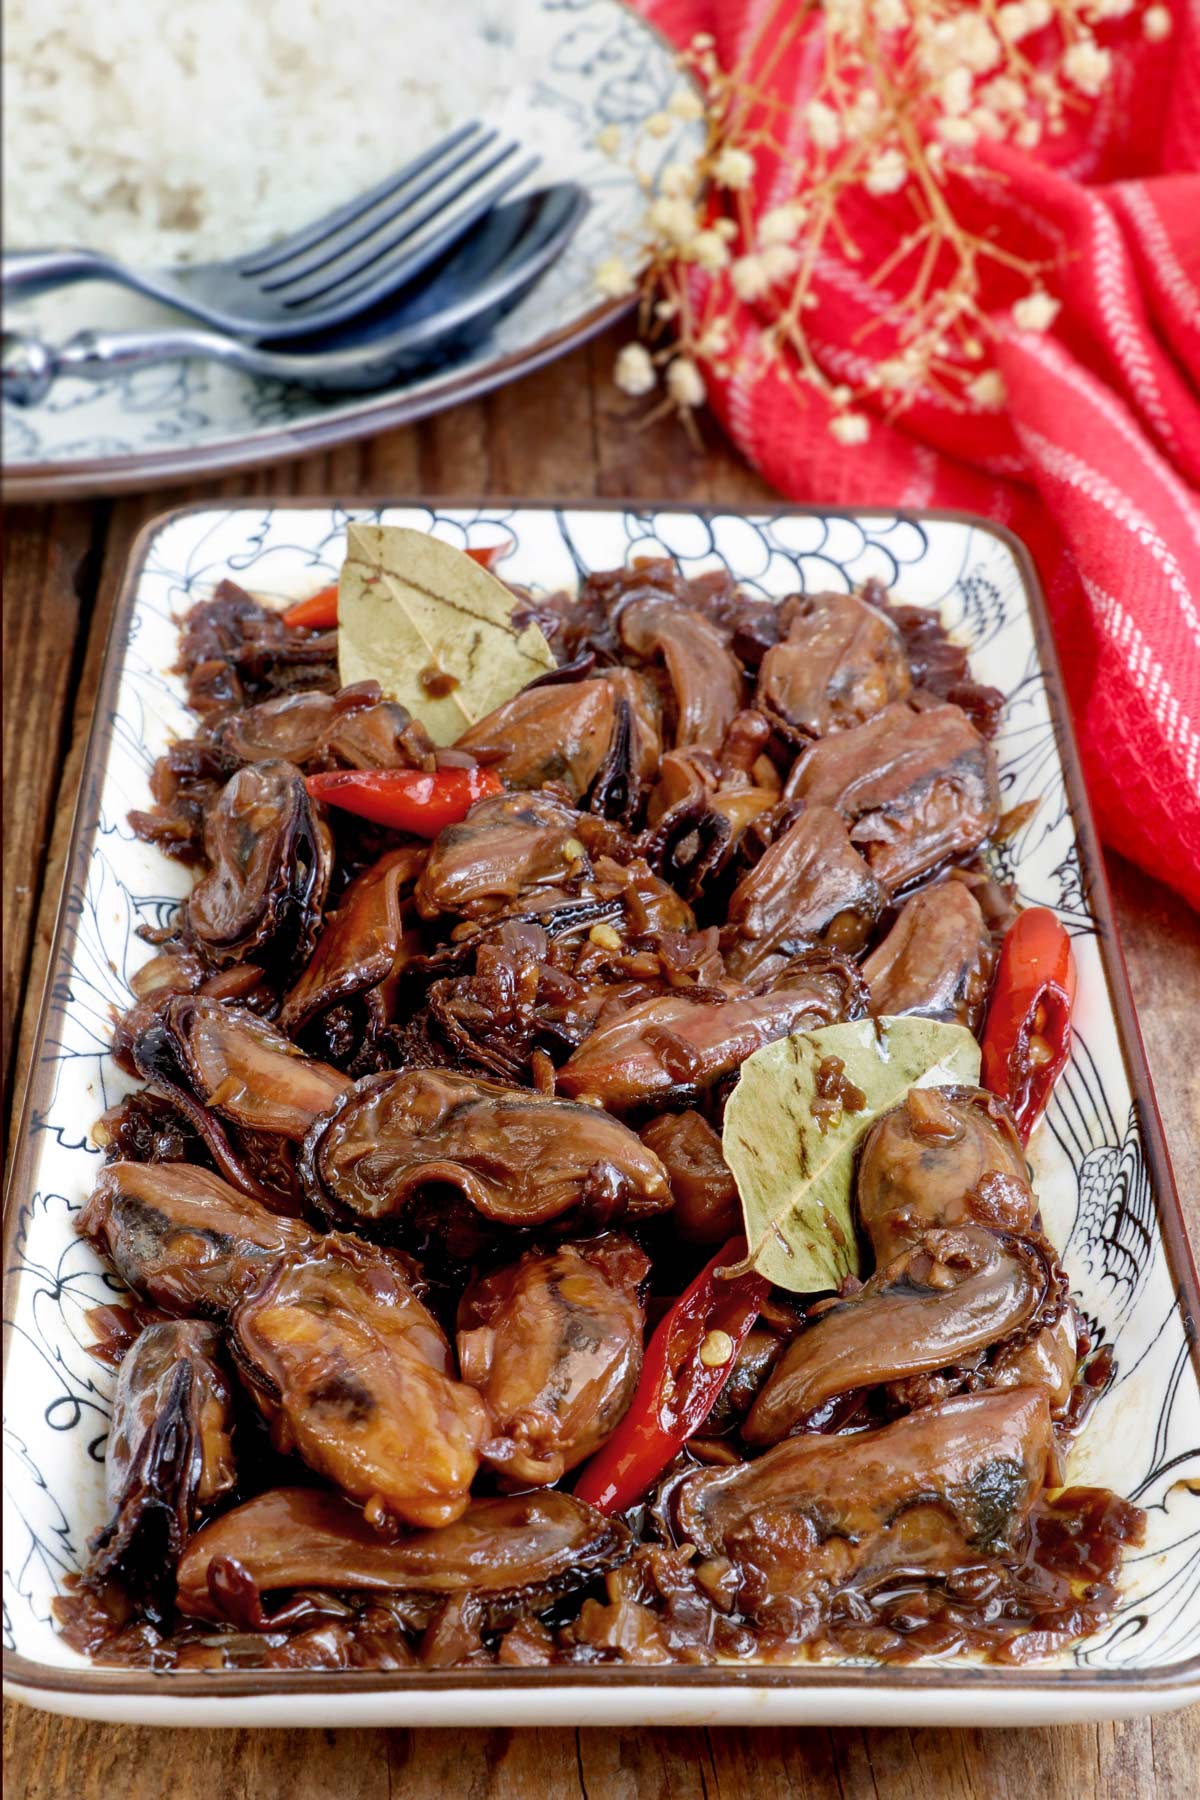 Spicy Adobong Tahong with tender and tasty mussels coated in a spiced soy-vinegar sauce.